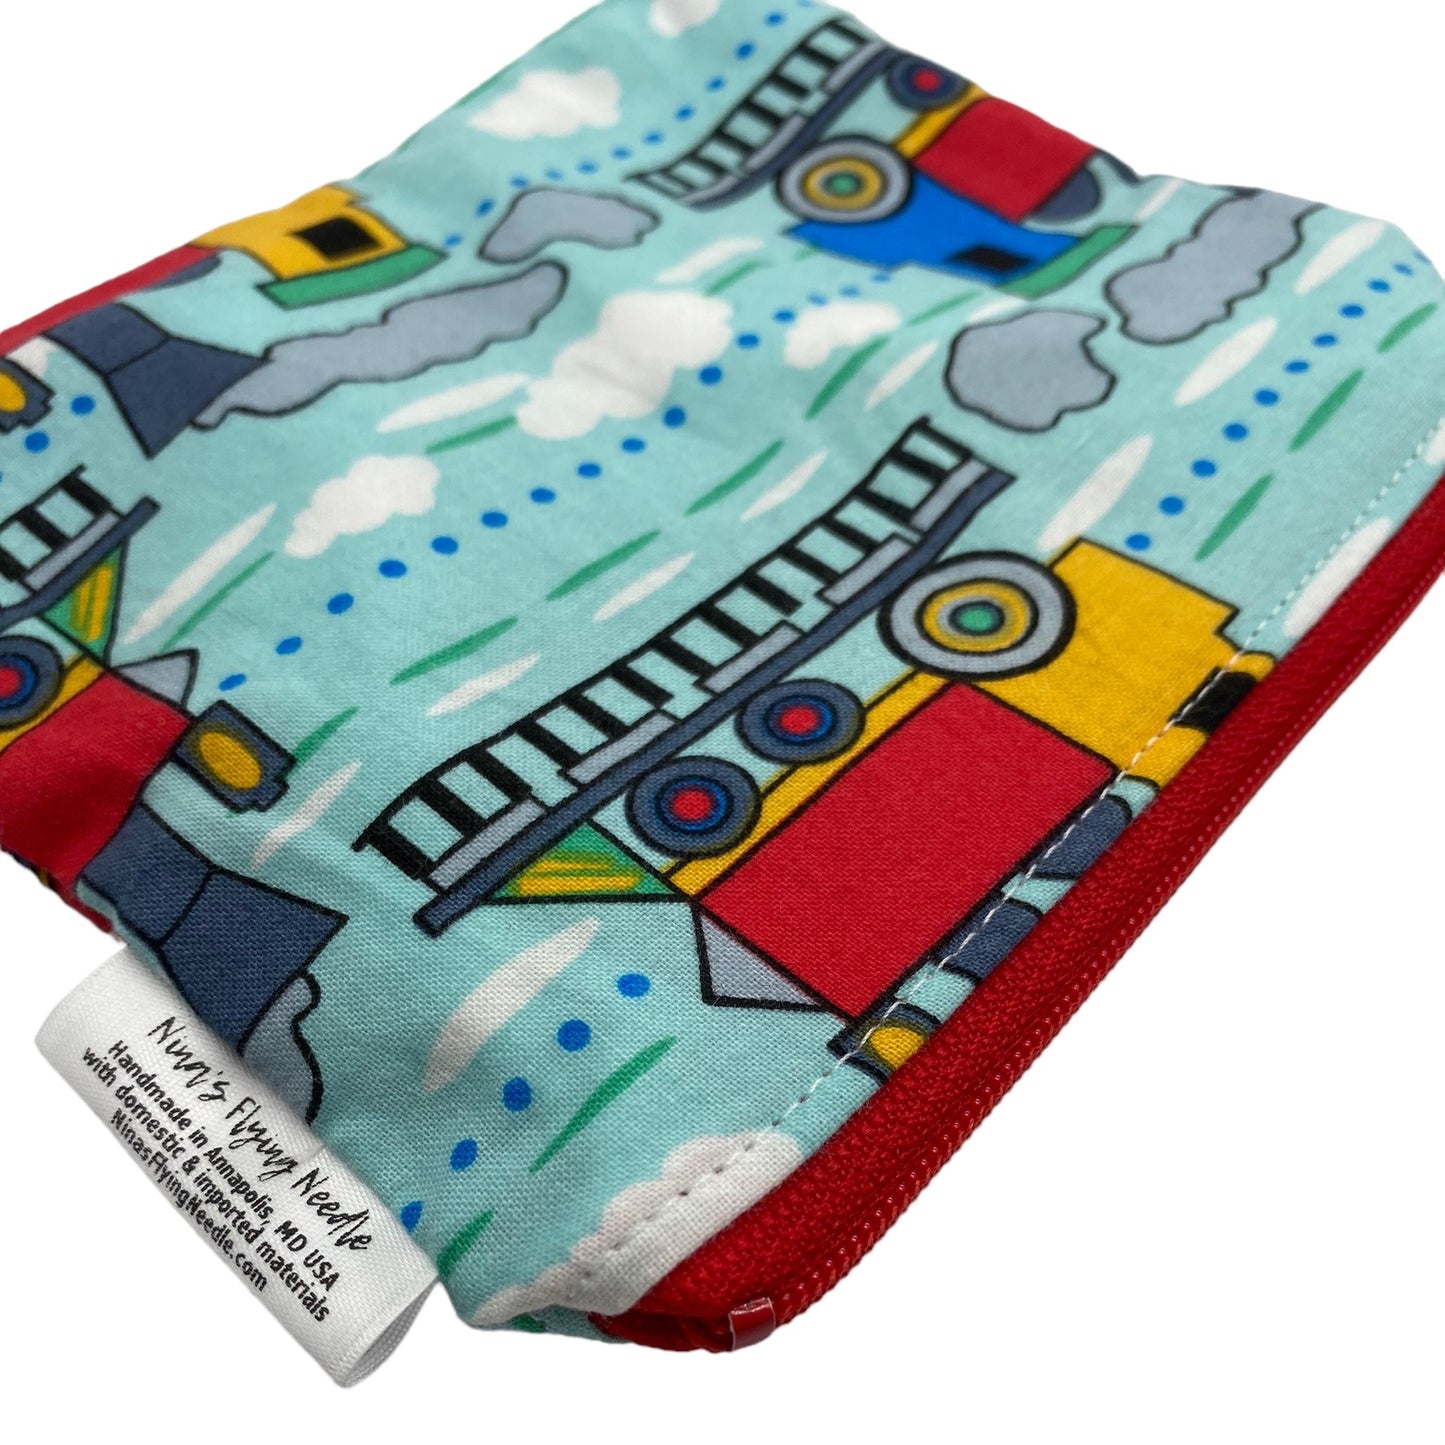 Toddler Sized Reusable Zippered Bag Trains